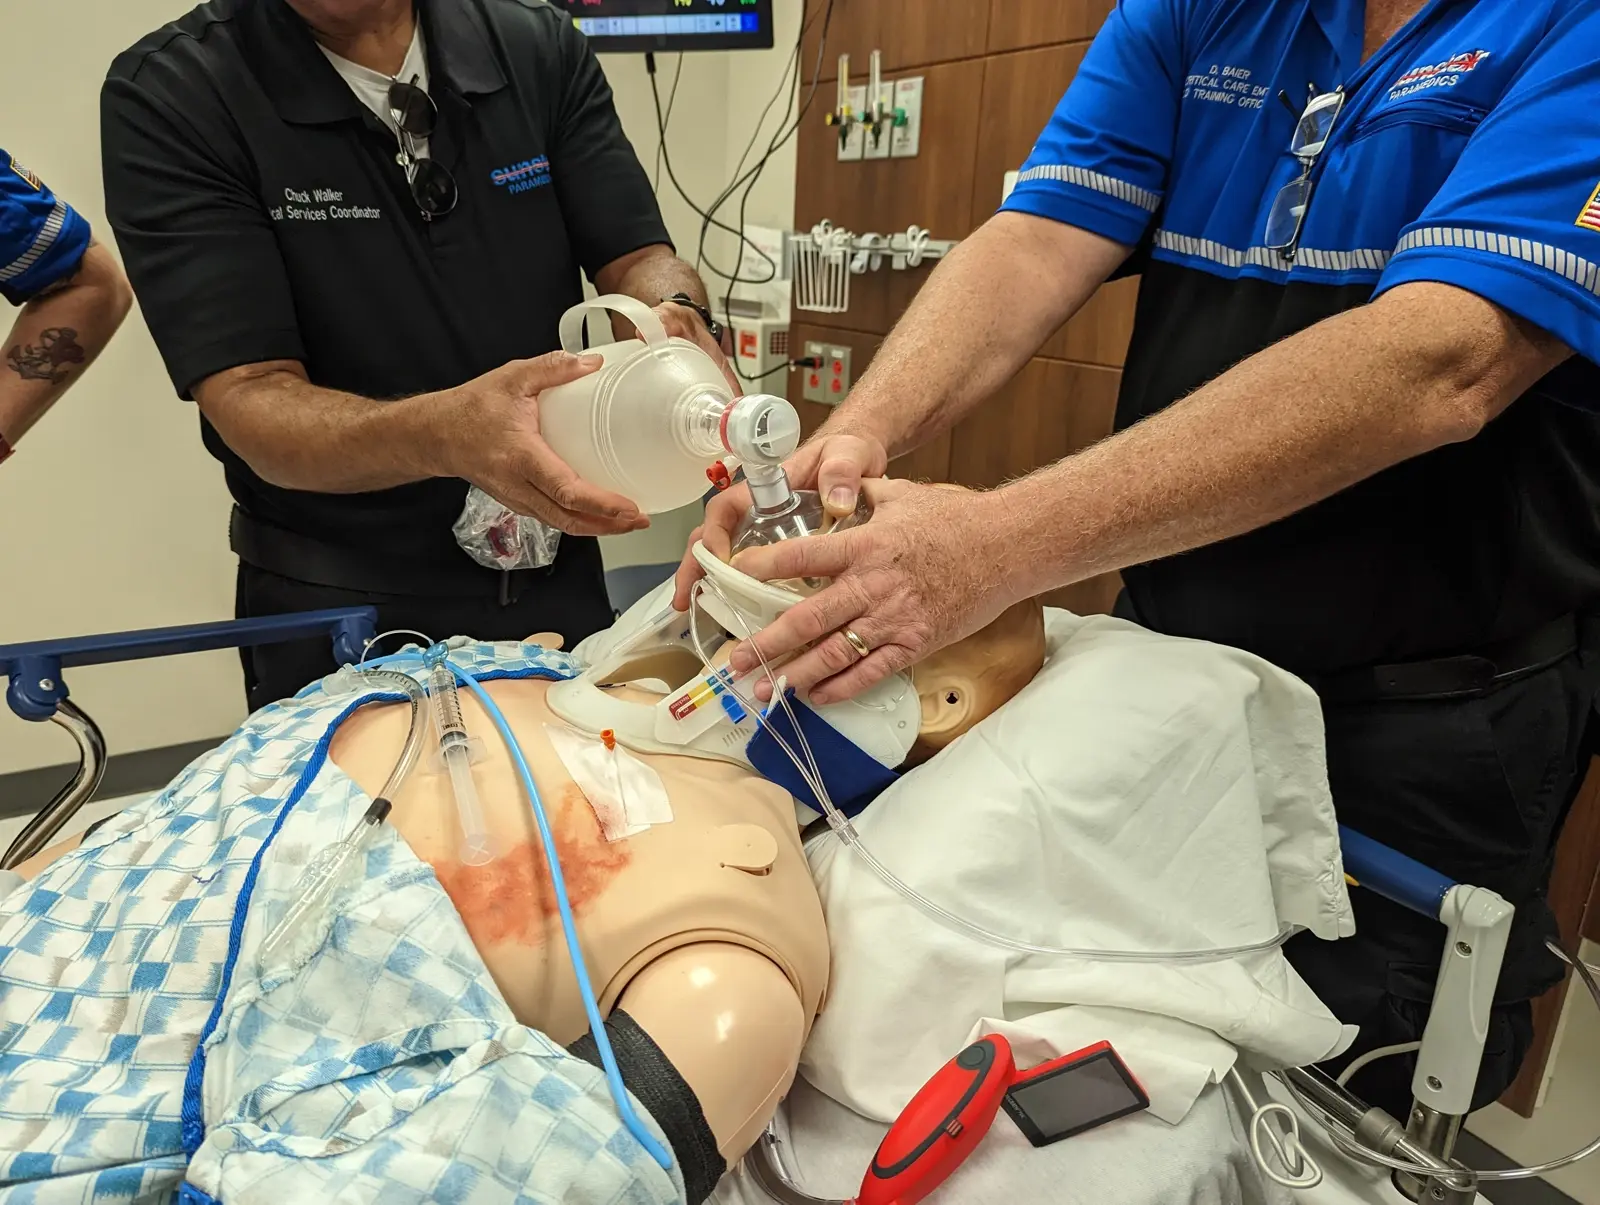 CAMLS Medical professionals demonstrate CPR techniques on a simulation mannequin. They use a bag valve mask for ventilation while monitoring hooked-up equipment. The scenario takes place in a clinical setting, with medical supplies and monitoring screens visible.